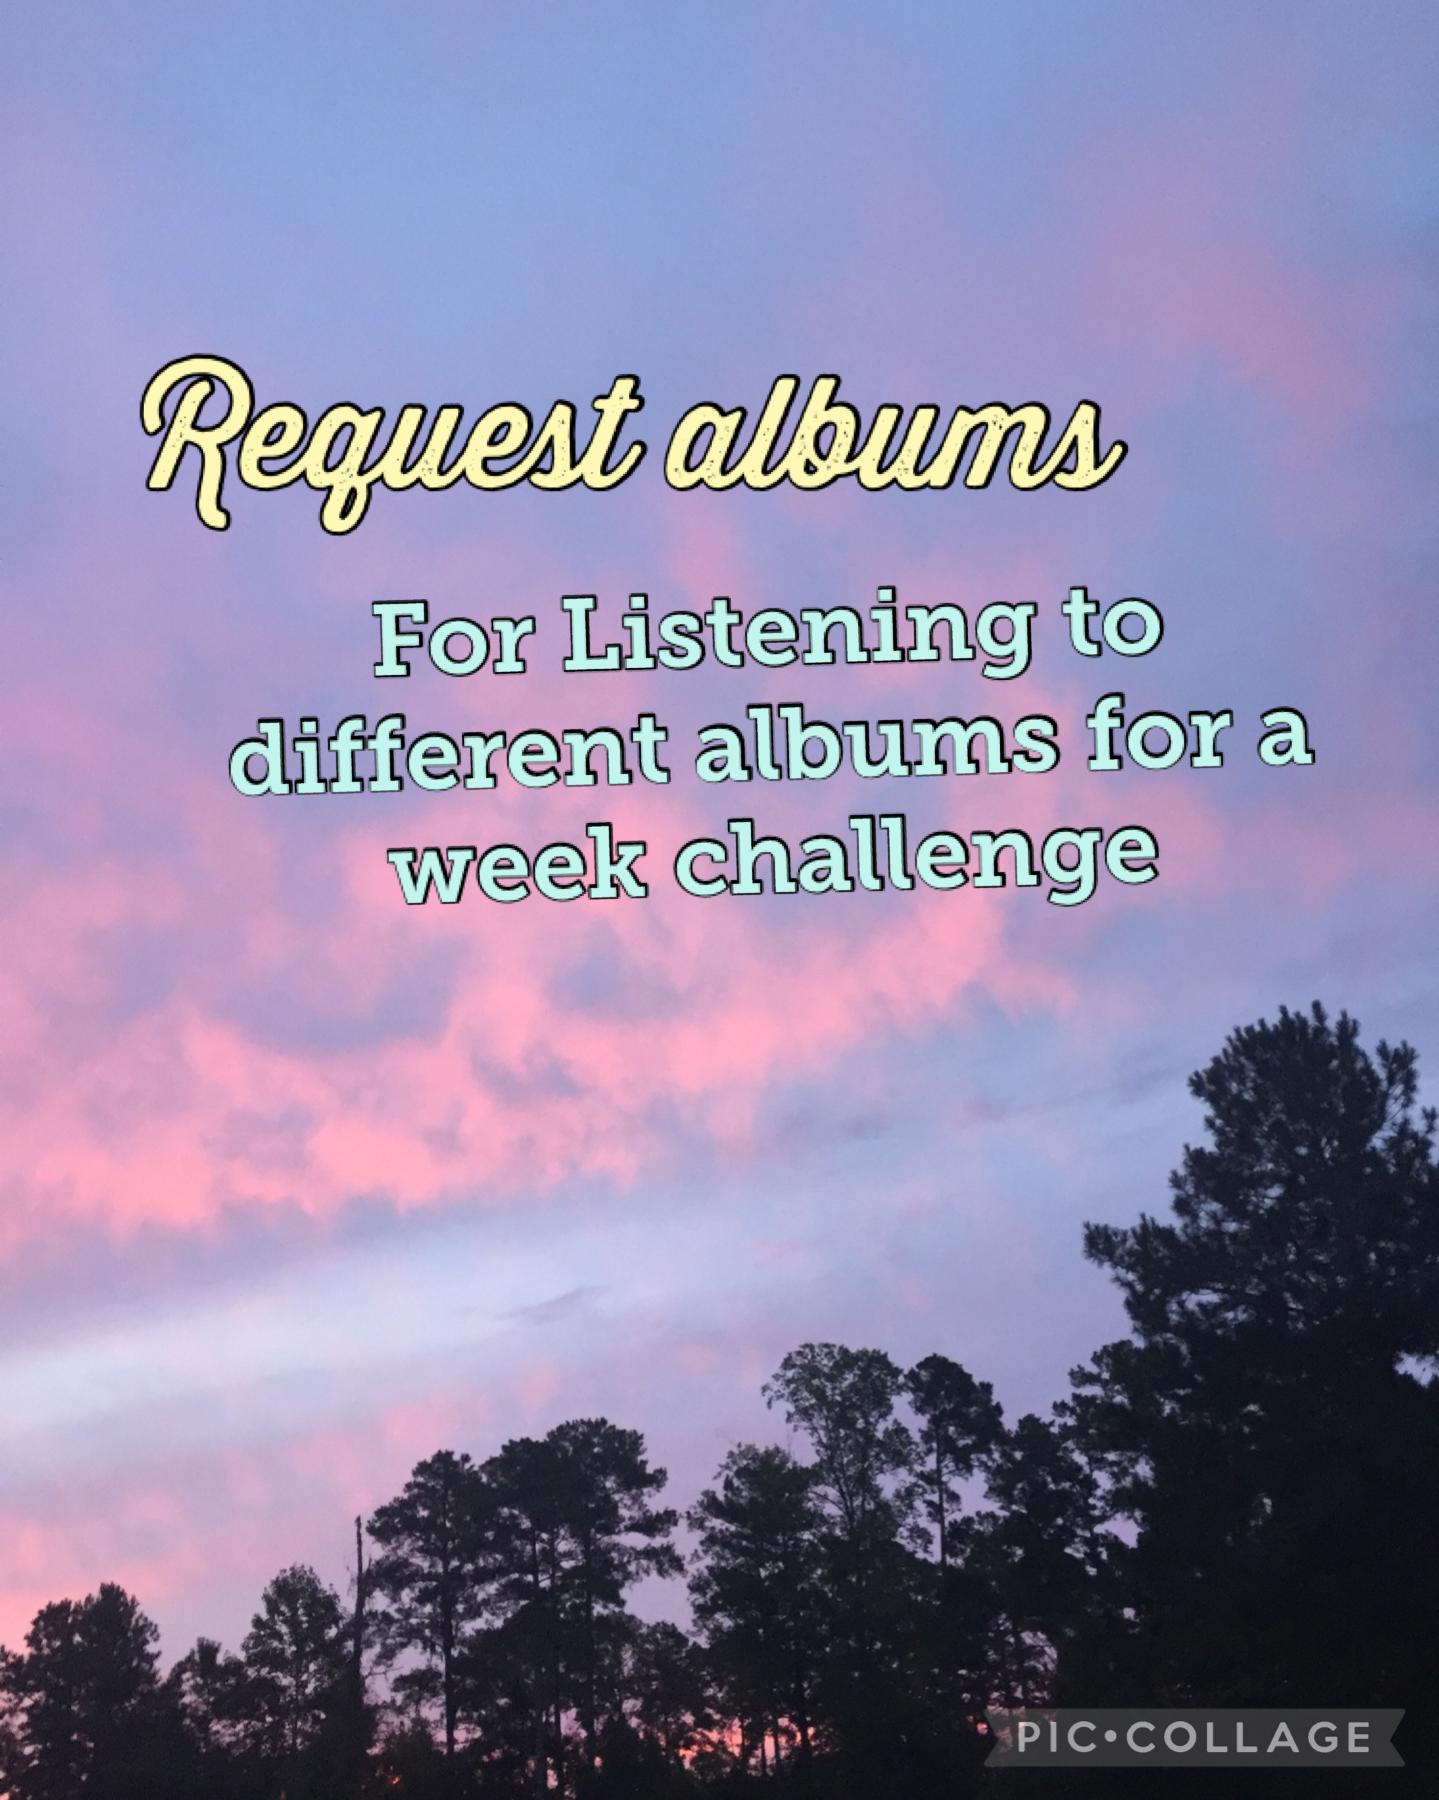 10.6.22 Request albums for listening to different albums for a week challenge 